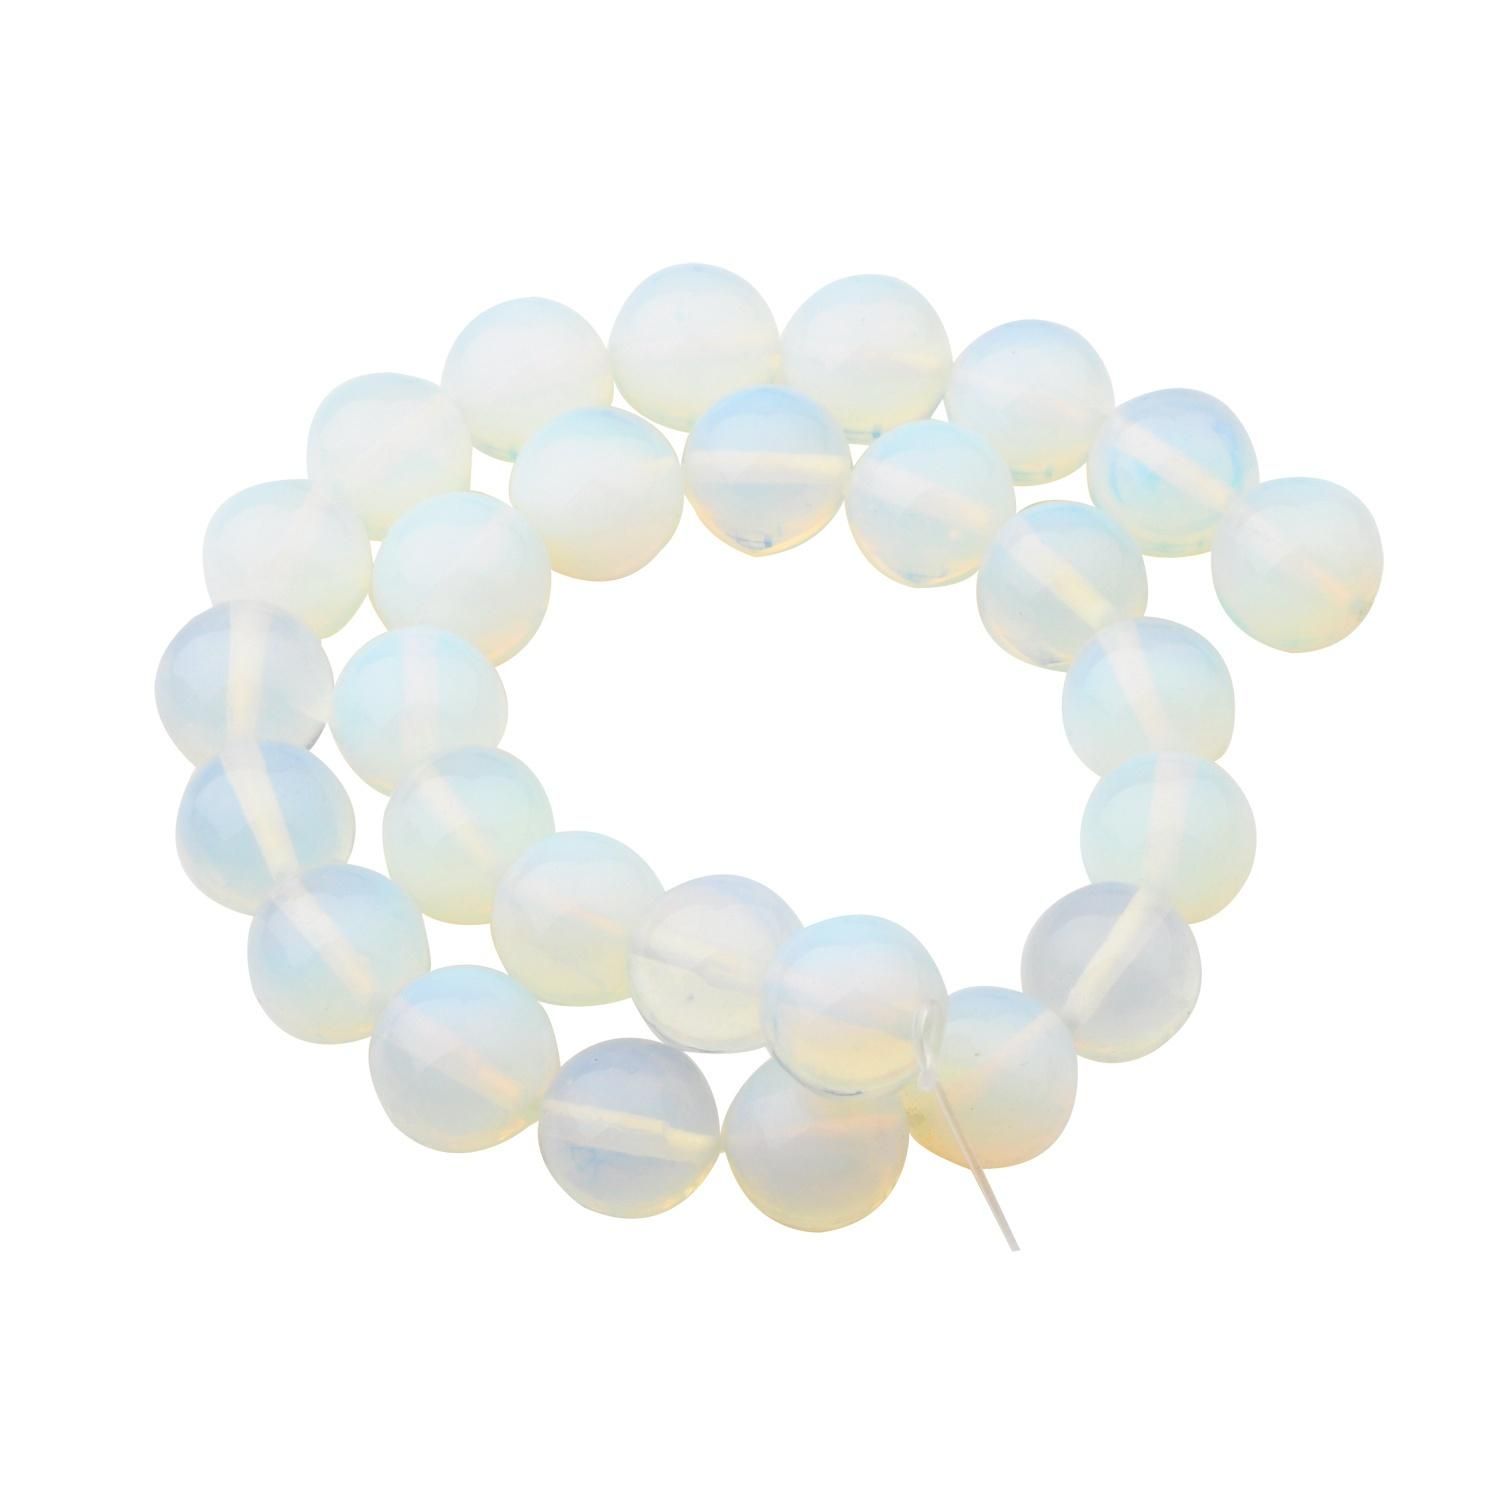 Opalite Beads White Opal Bead Crystal Round Ball Beads Wholesale